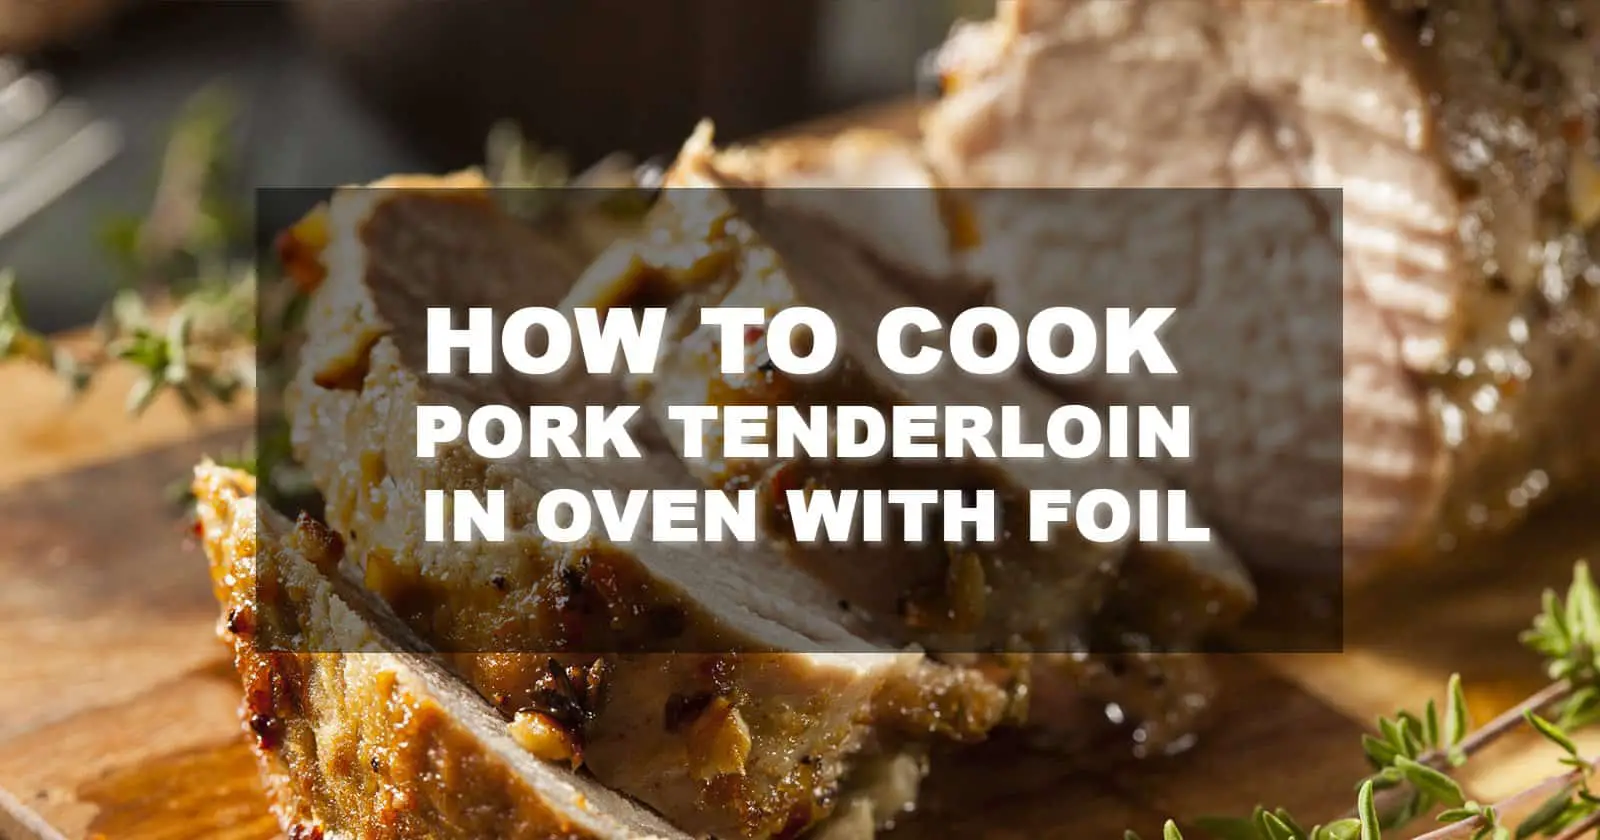 How To Cook Pork Tenderloin in Oven with Foil - FamilyNano